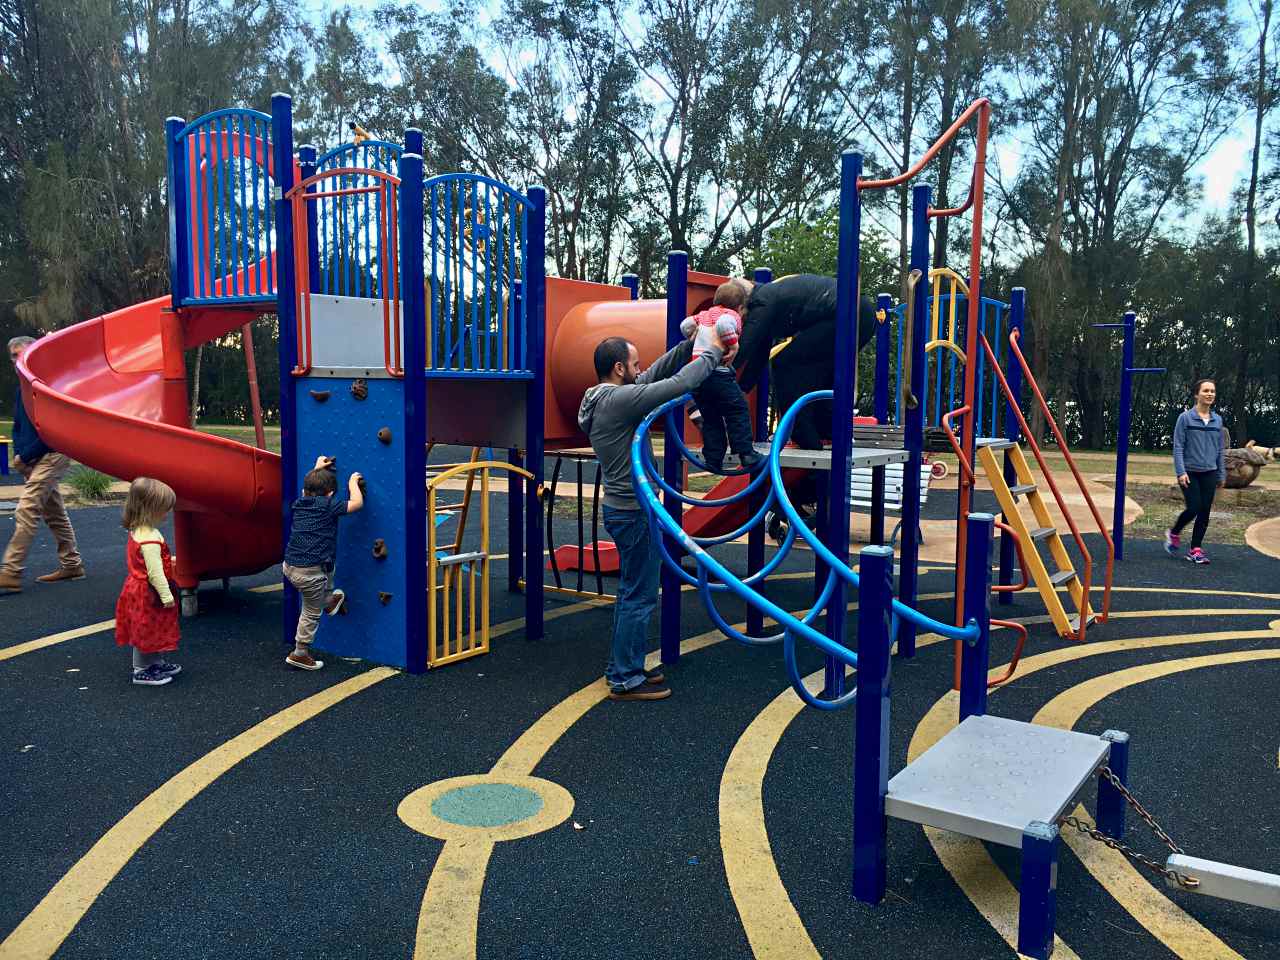 Stop for a Play at Broadwater Park in Kincumber Before Continuing Along the Cycle Path to Davistown